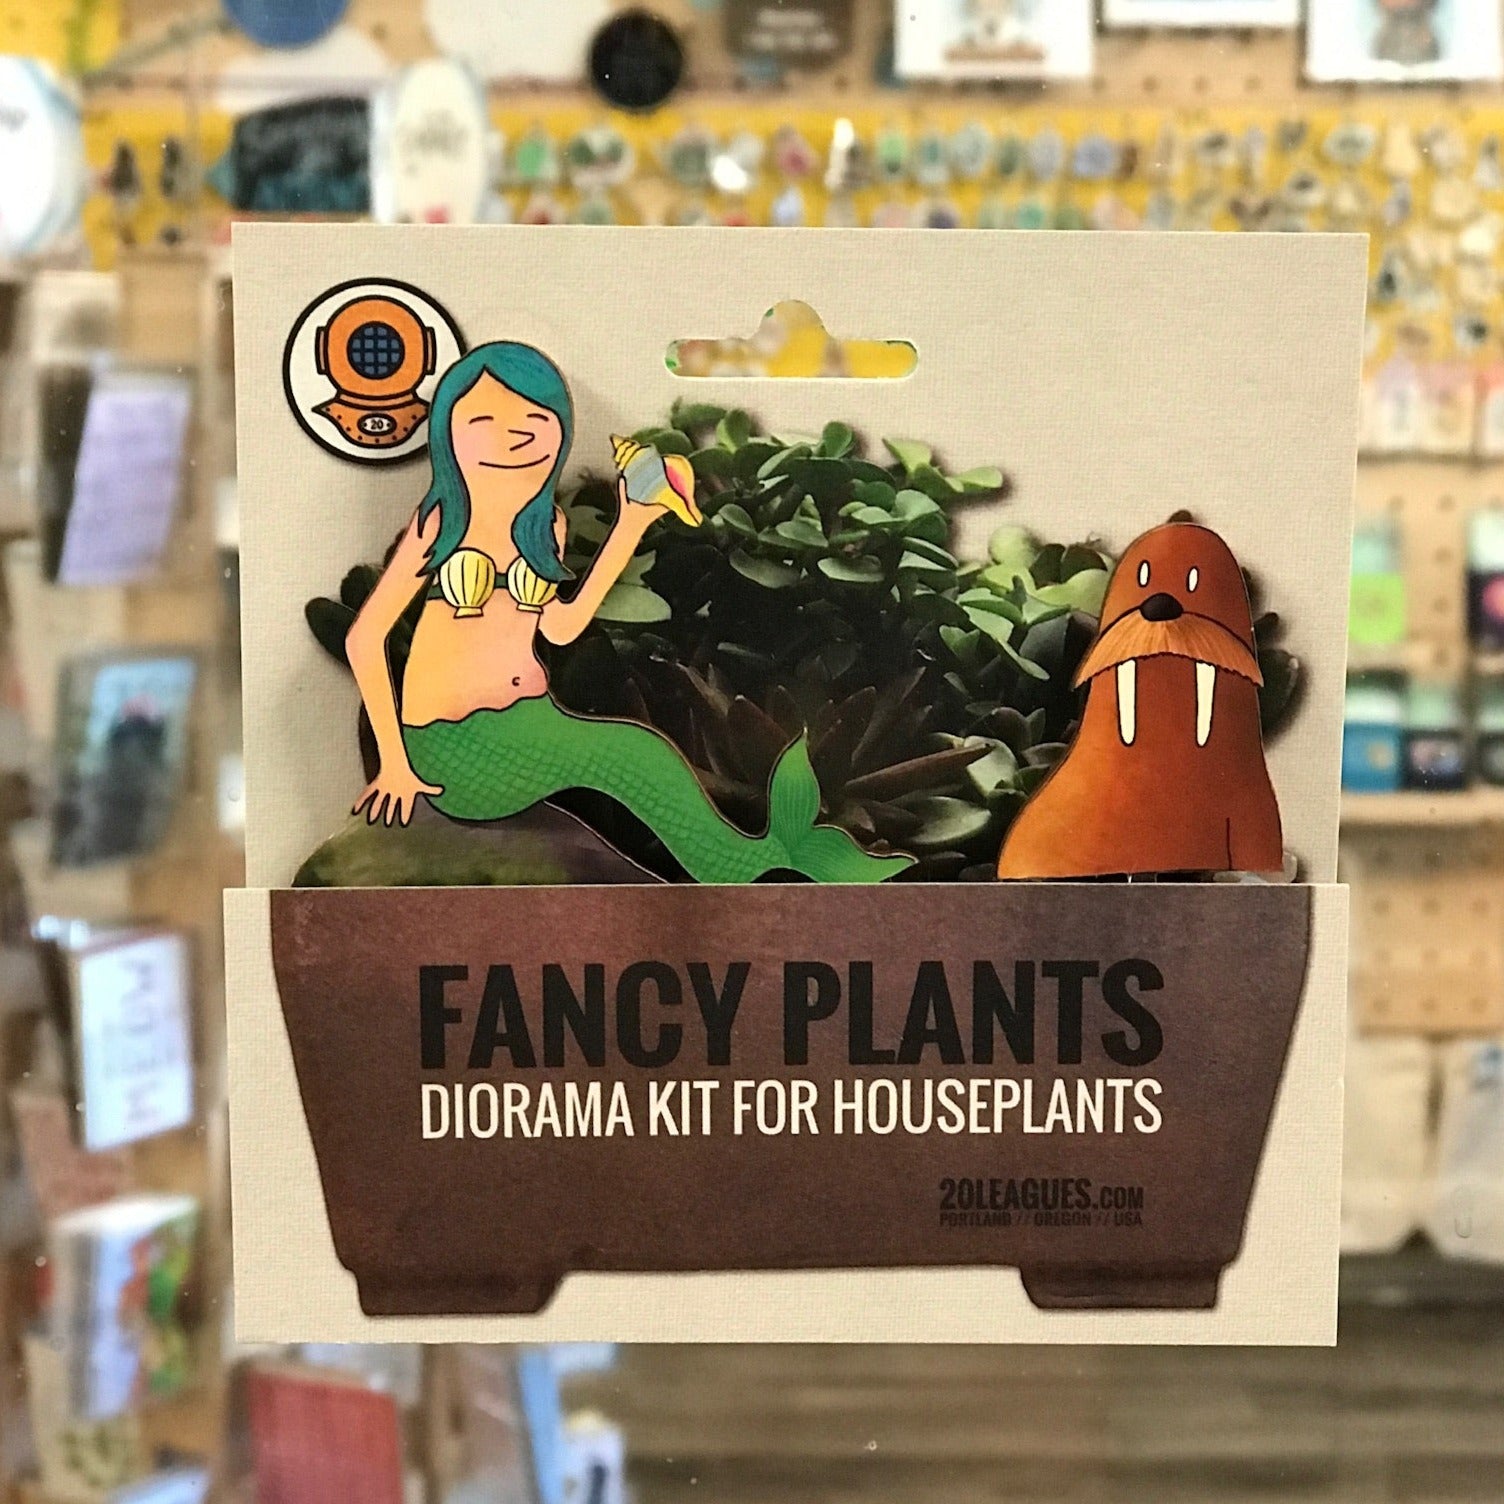 Close up photo of a Fancy Plants Diorama Kit for Houseplants by 20 Leagues. This one has a mermaid with blue hair wearing a shell bra. She is holding a shell & sitting next to a walrus with long tusks. 